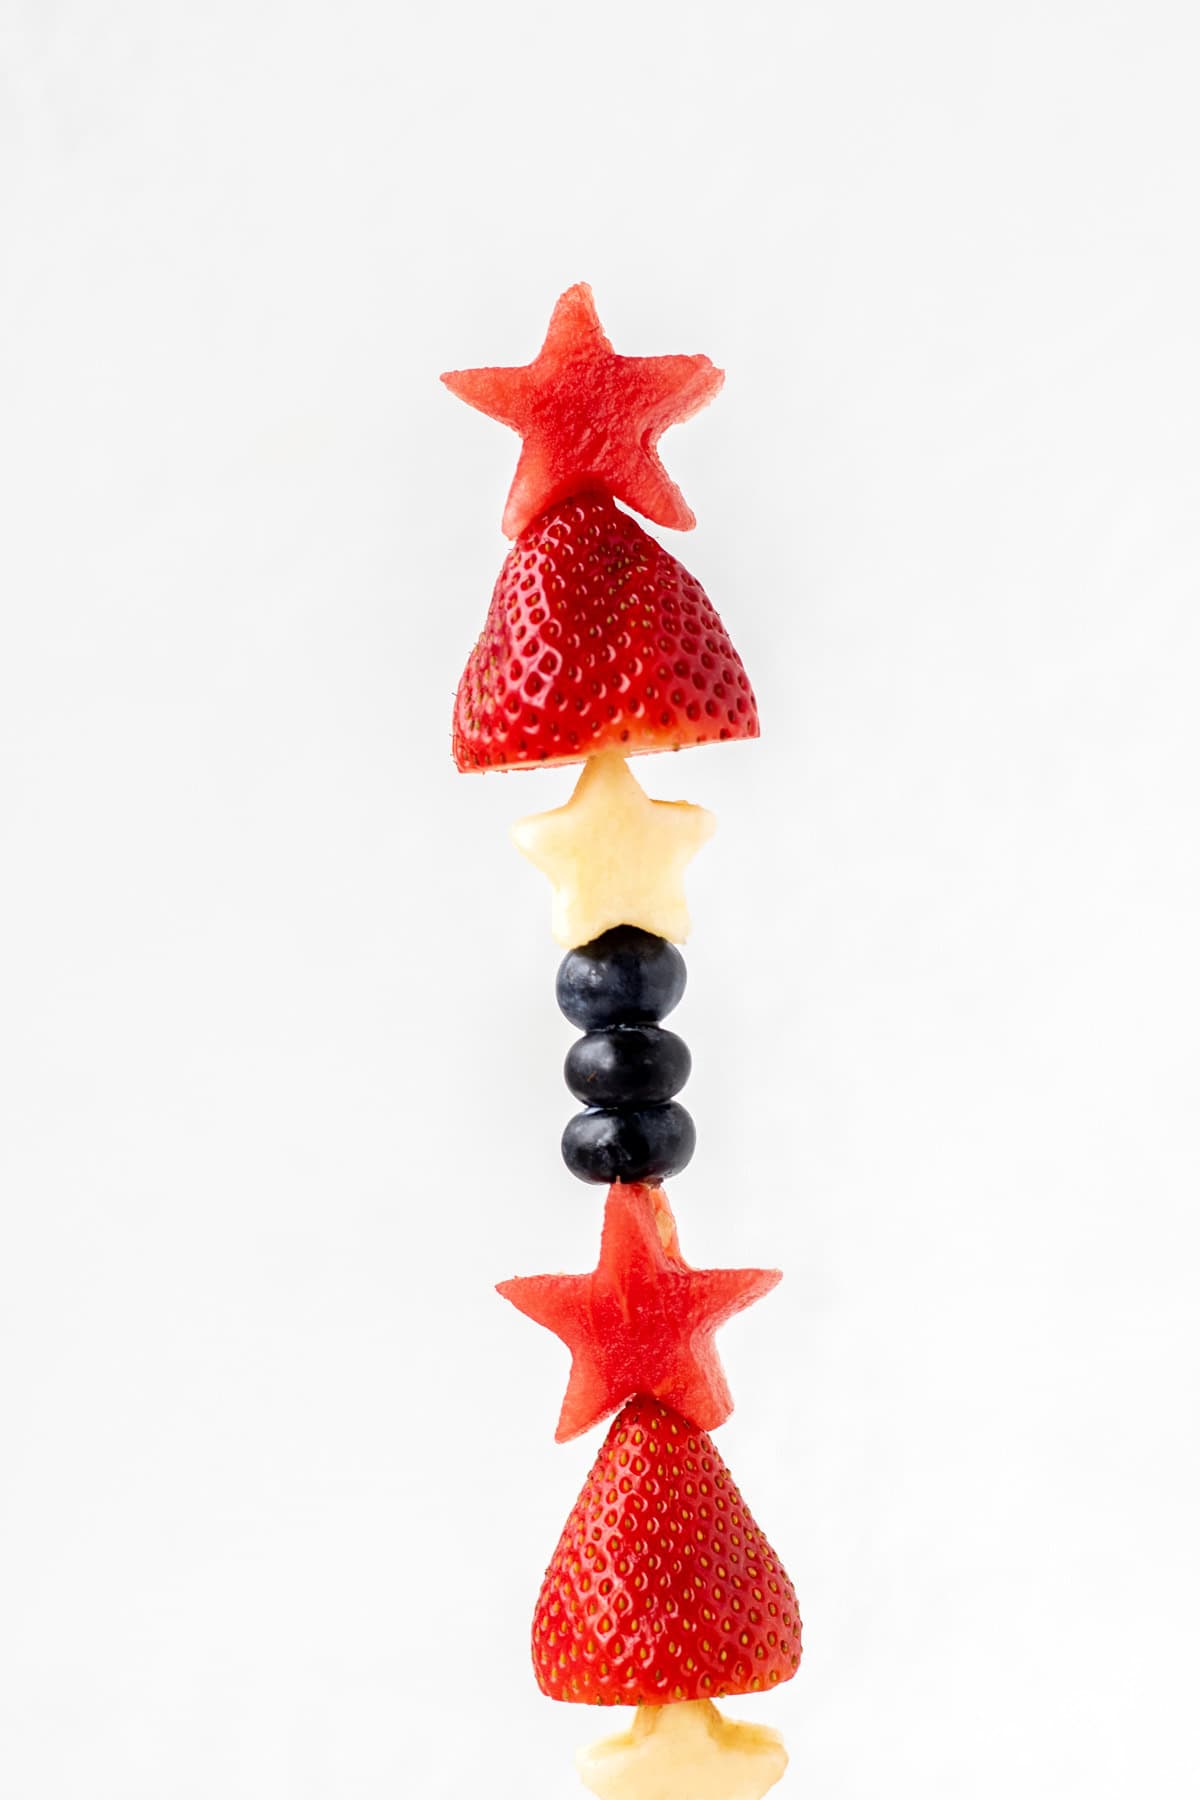 A close-up of a 4th of July fruit skewer.